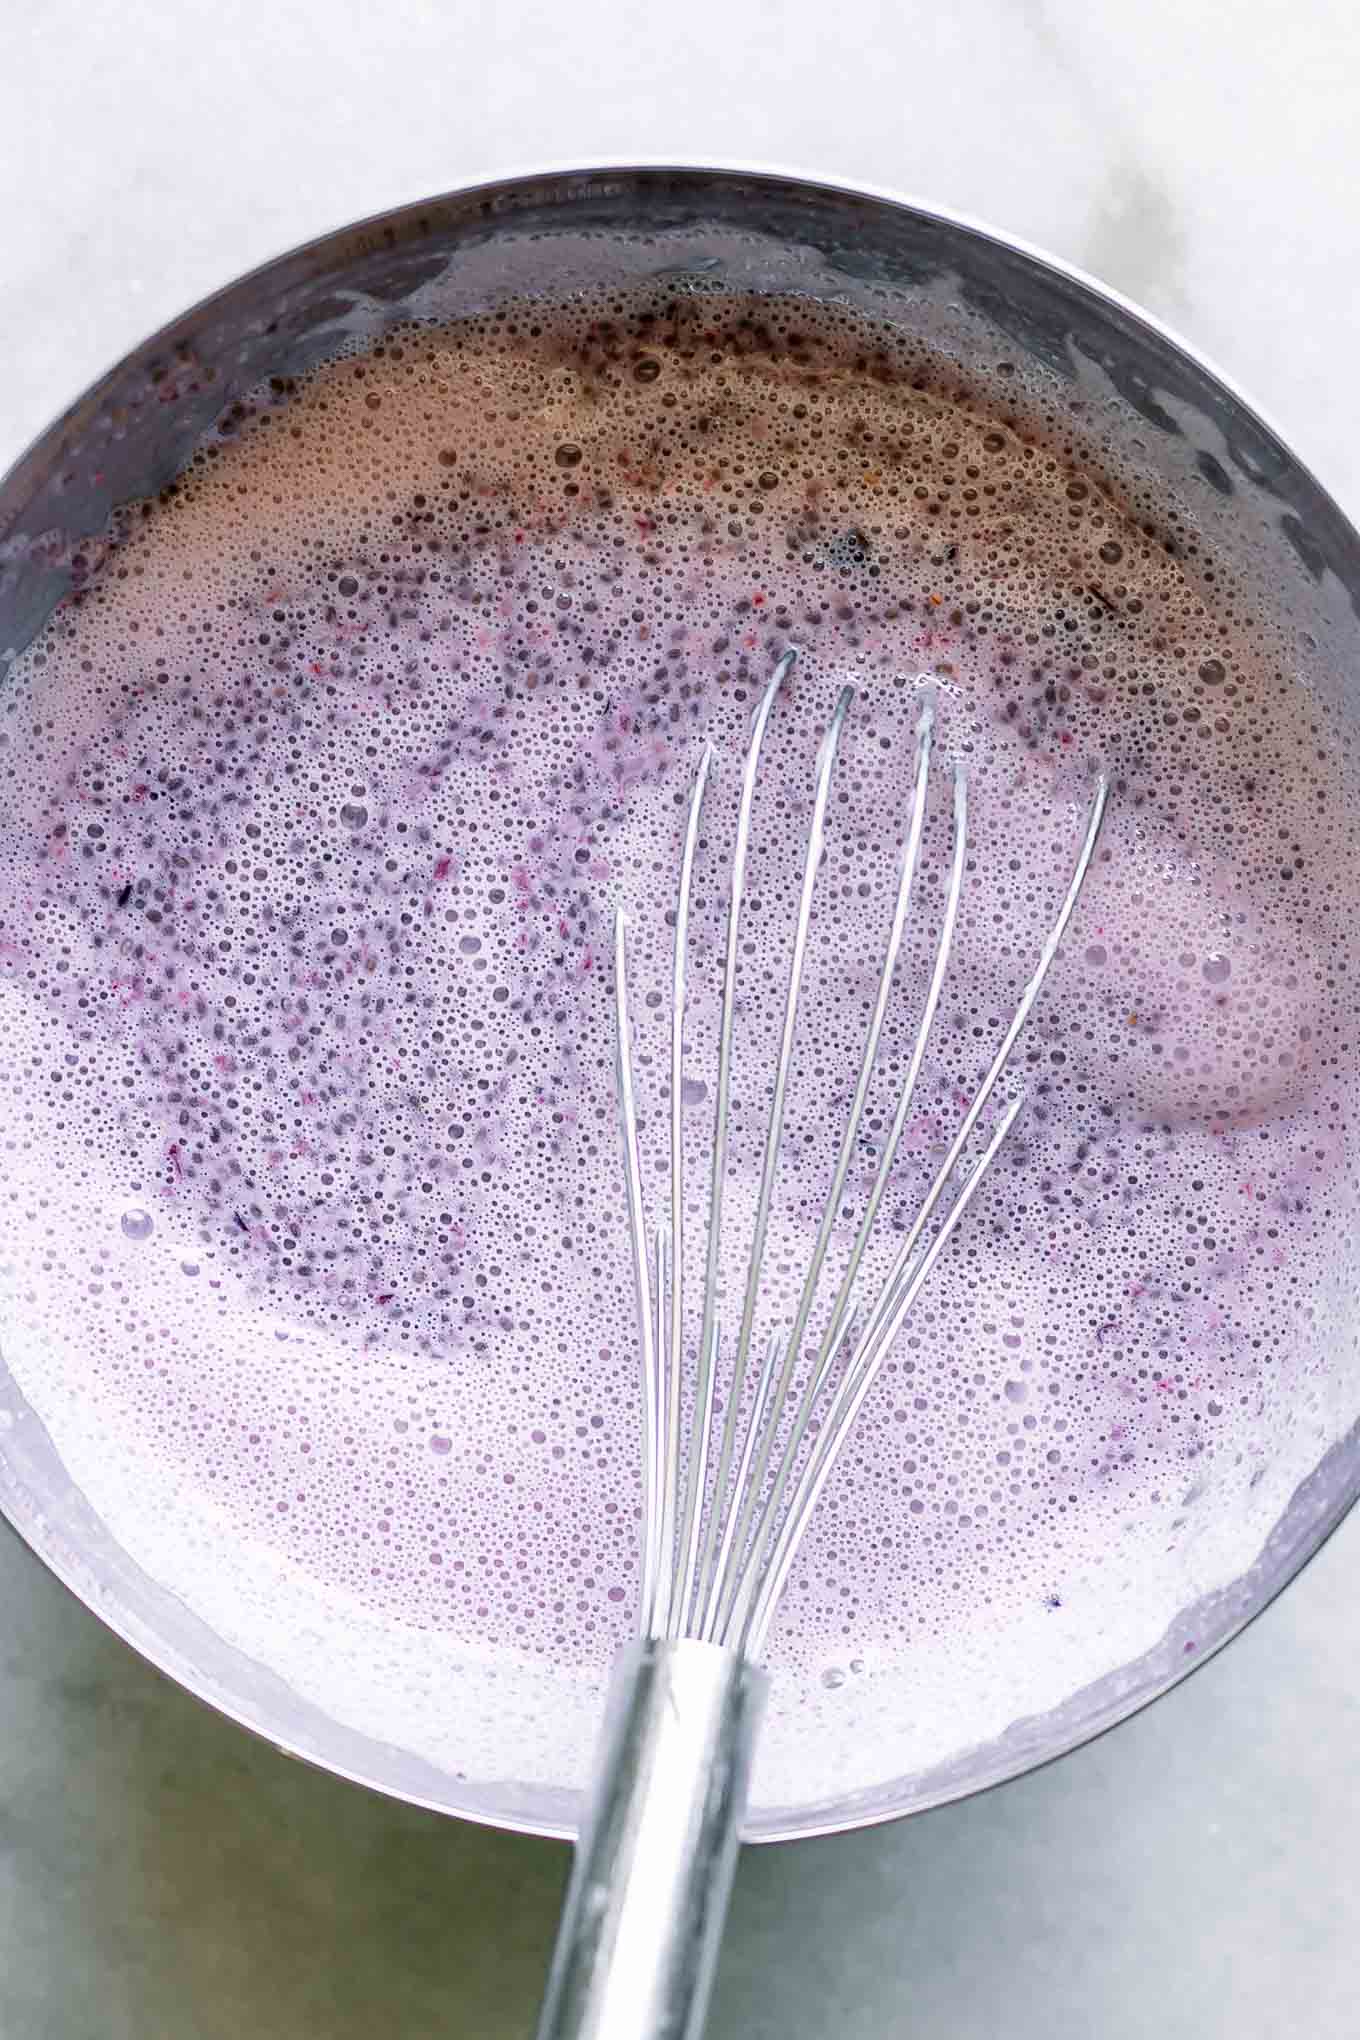 chia seeds in plum-flavored milk in a bowl with a whisk on a white table